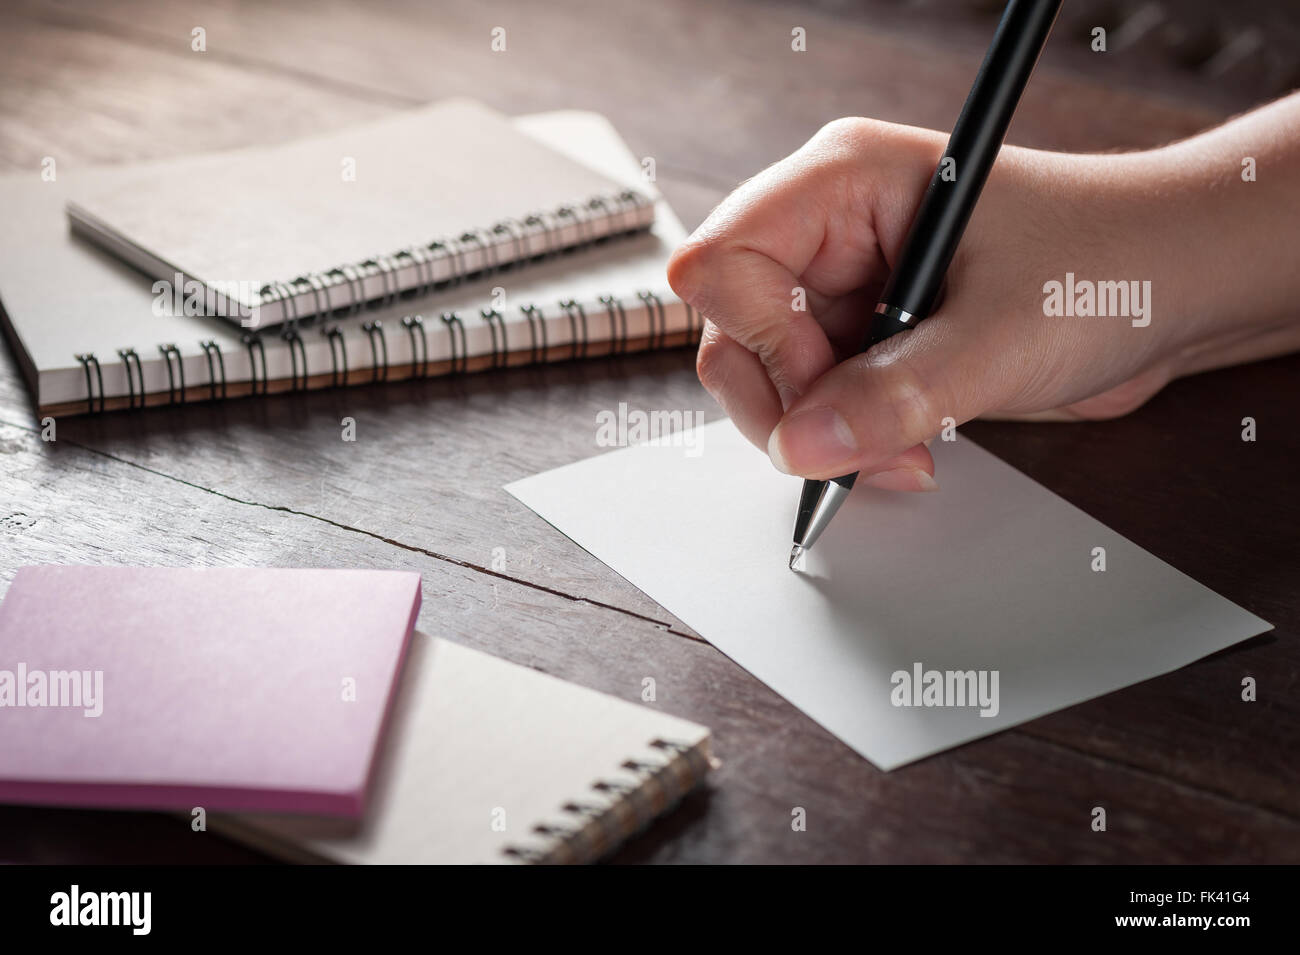 Woman right hand writing on blank paper on wood table with notebooks on wood table with low key scene and vintage filter effect Stock Photo